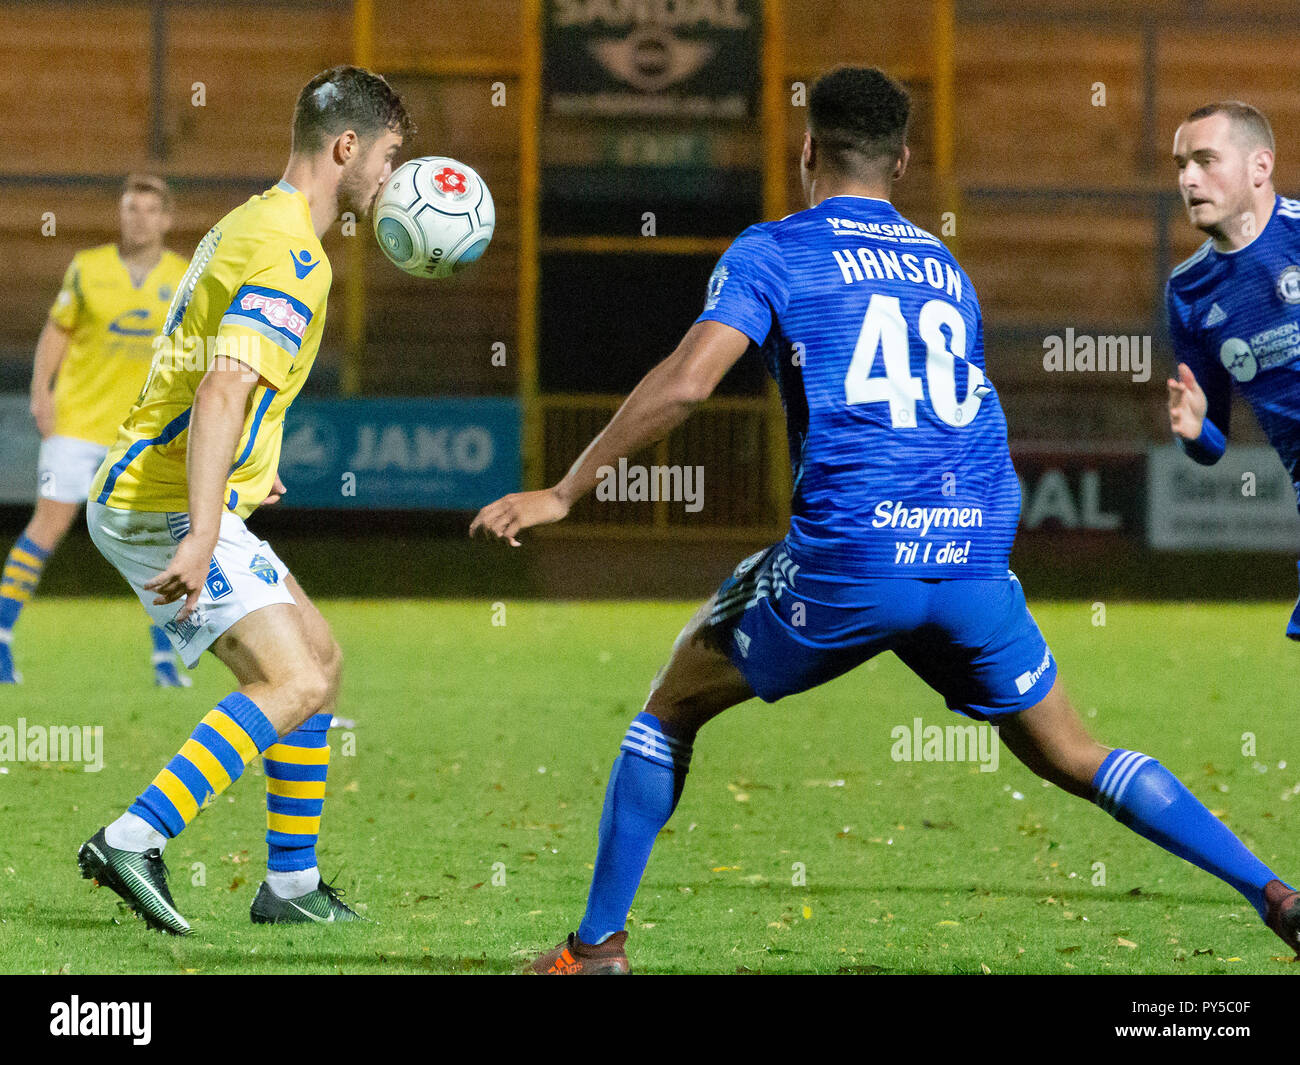 23 October 2018 - FC Halifax Town v Warrington Town AFC - FA Cup 4th qualifying round replay Stock Photo